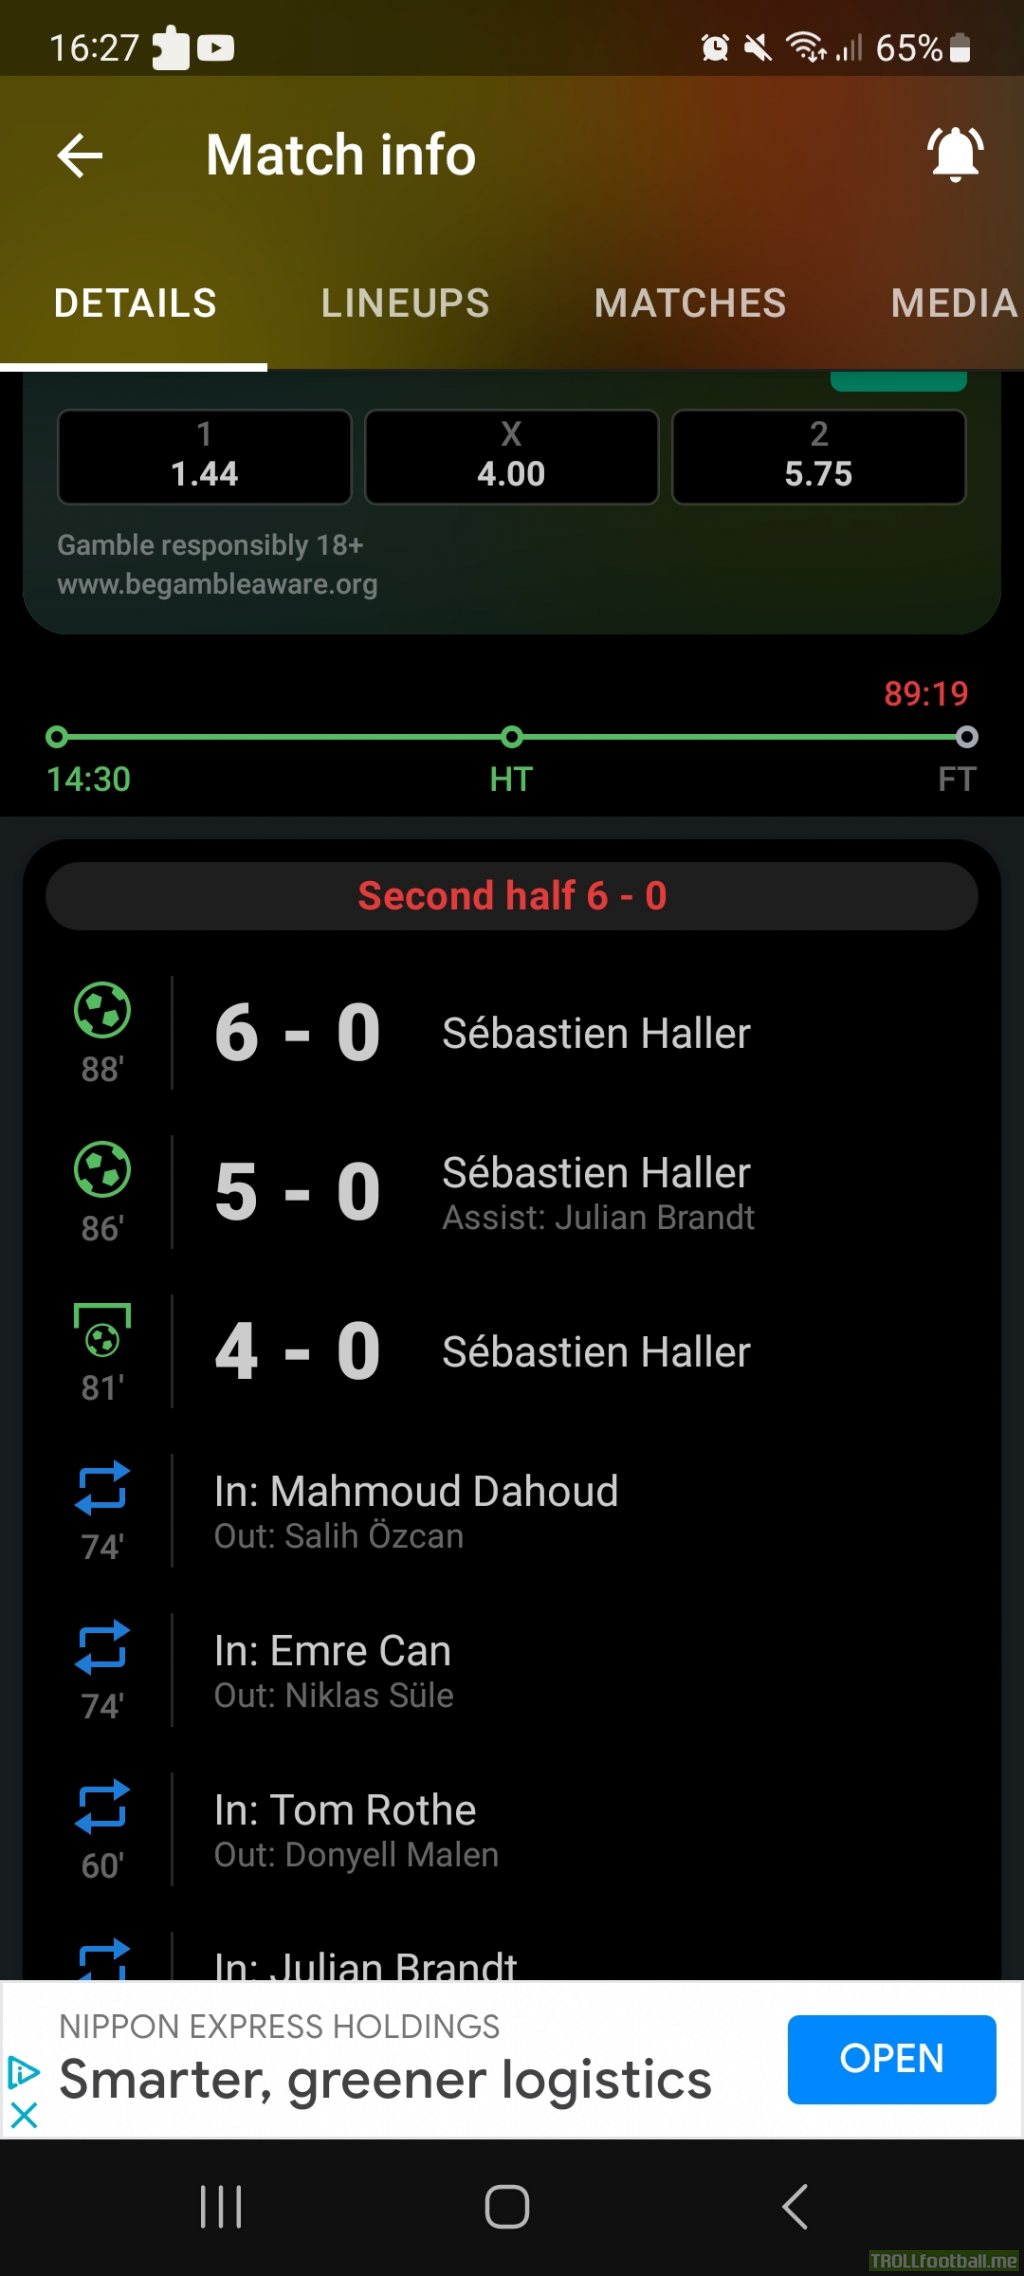 Sebastian Haller jsut scored a 7 minute hat-trick in a friendly vs Basel. His first game back after undergoing two surgeries and chemo for cancer.